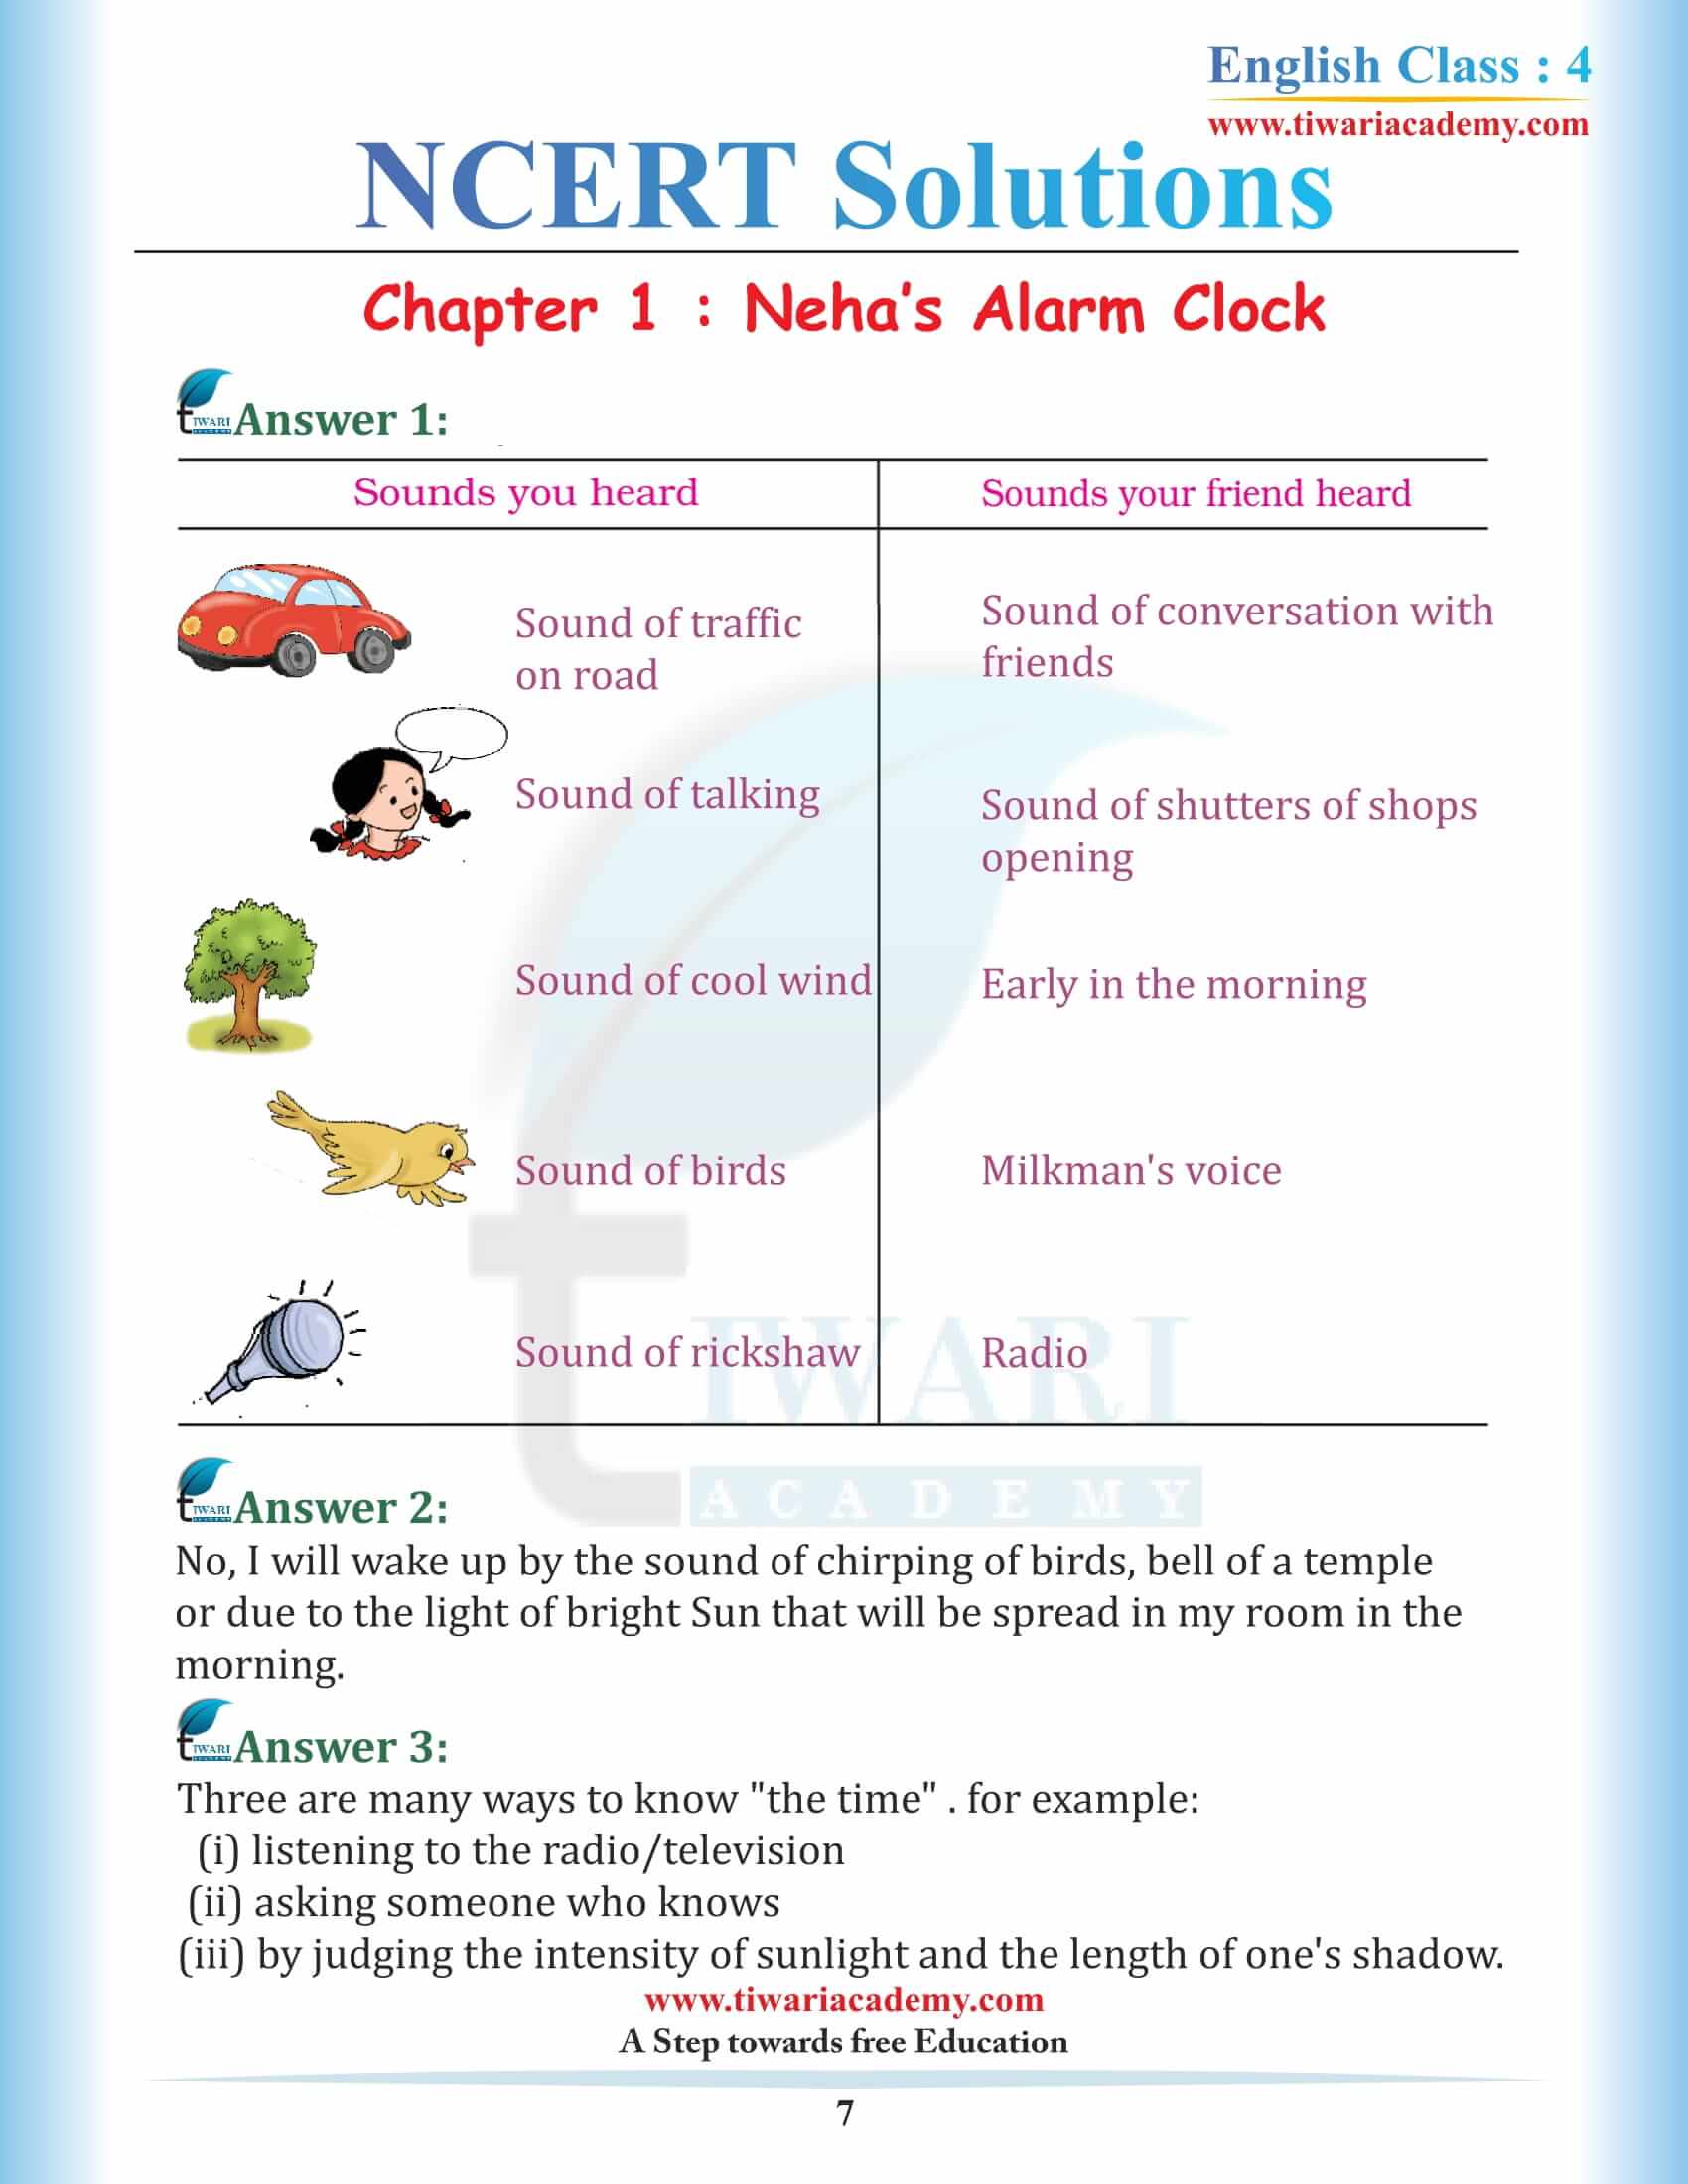 Class 4 English Unit 1 solutions